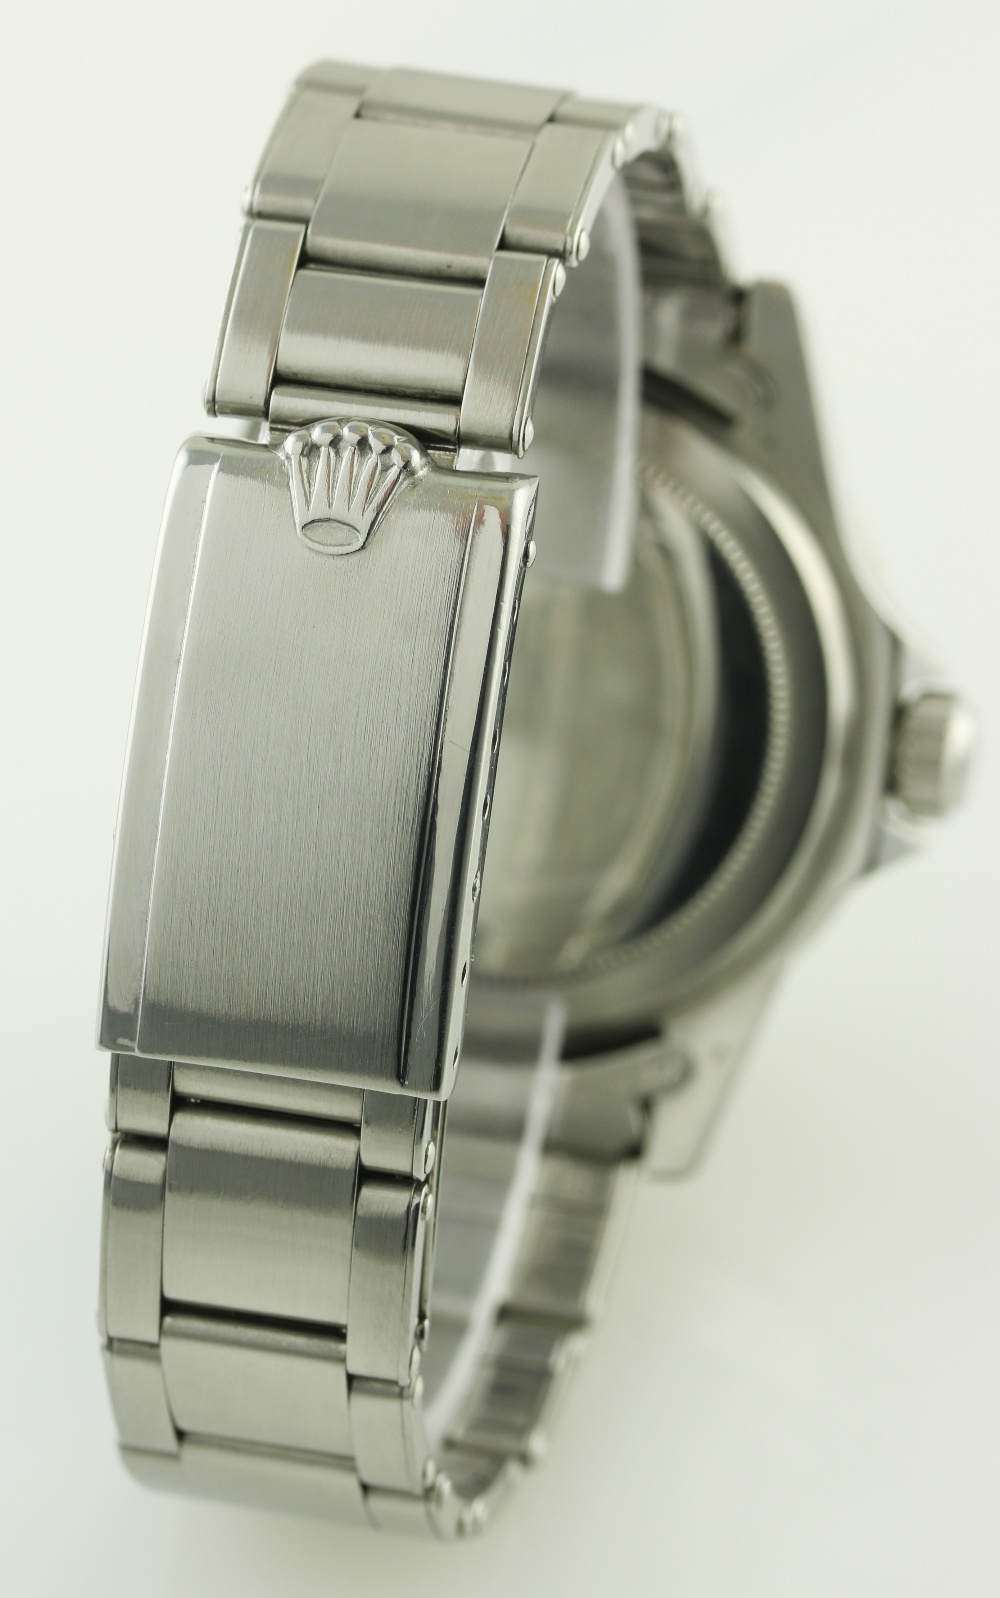 A RARE GENTLEMAN'S STAINLESS STEEL ROLEX OYSTER PERPETUAL SUBMARINER BRACELET WATCH CIRCA 1963, REF. - Image 5 of 6